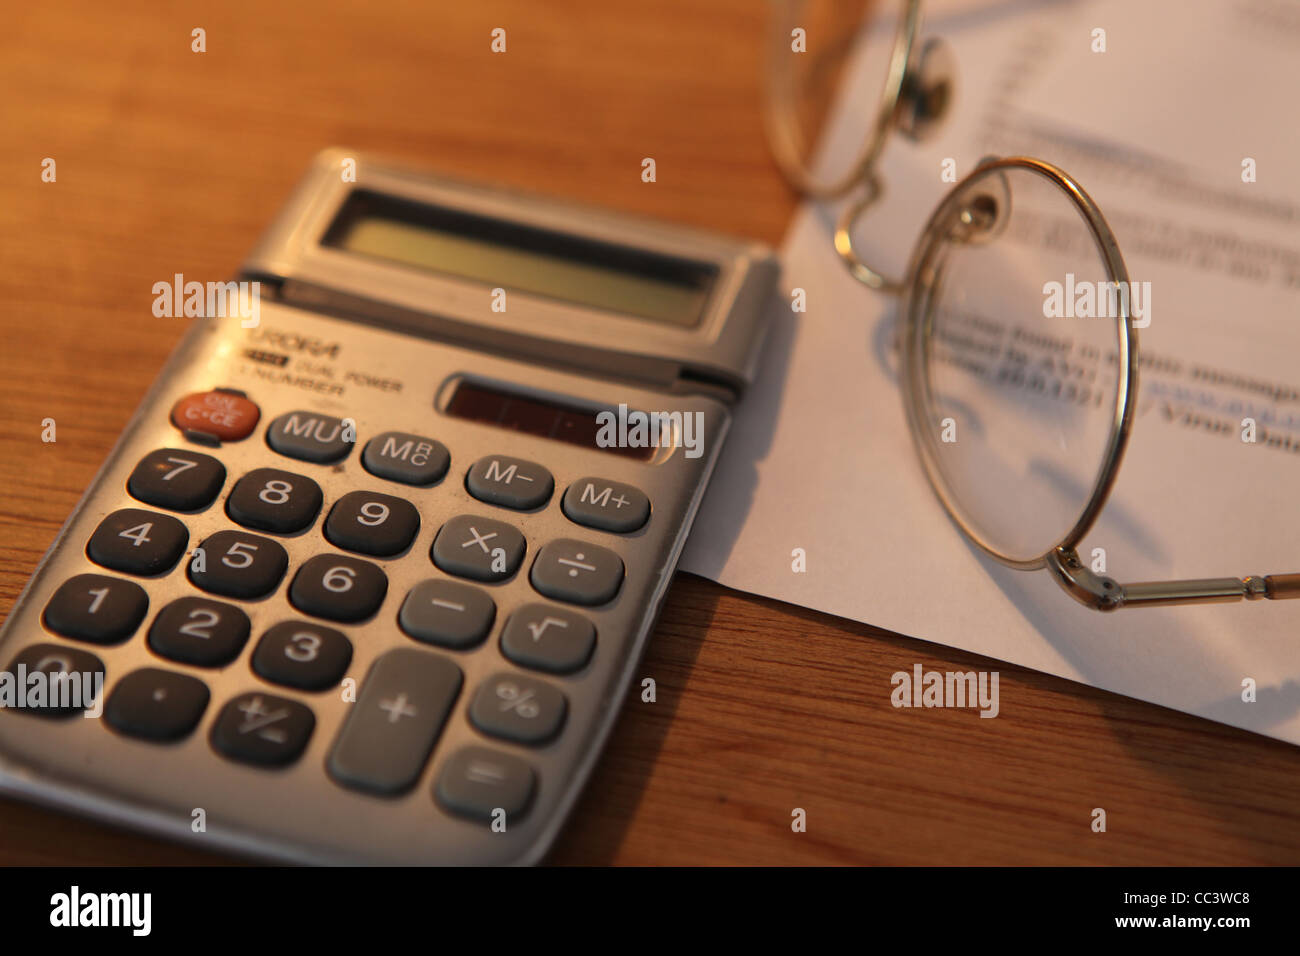 DESK WITH CALCULATOR AND GLASSES Stock Photo